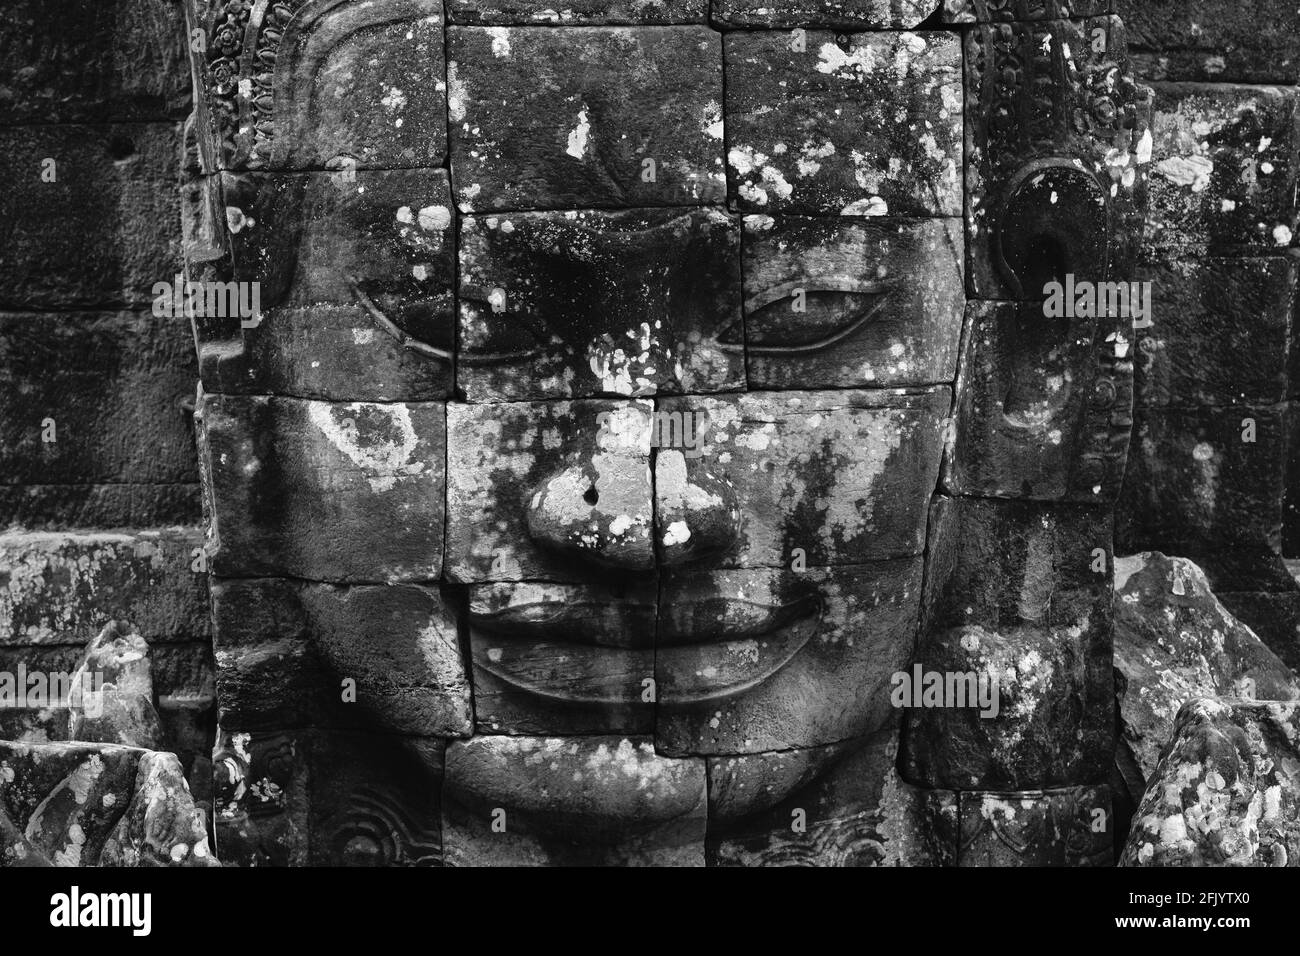 Stone Faces At The Bayon Temple, Angkor Wat Temple Complex, Siem Reap, Cambodia. Stock Photo